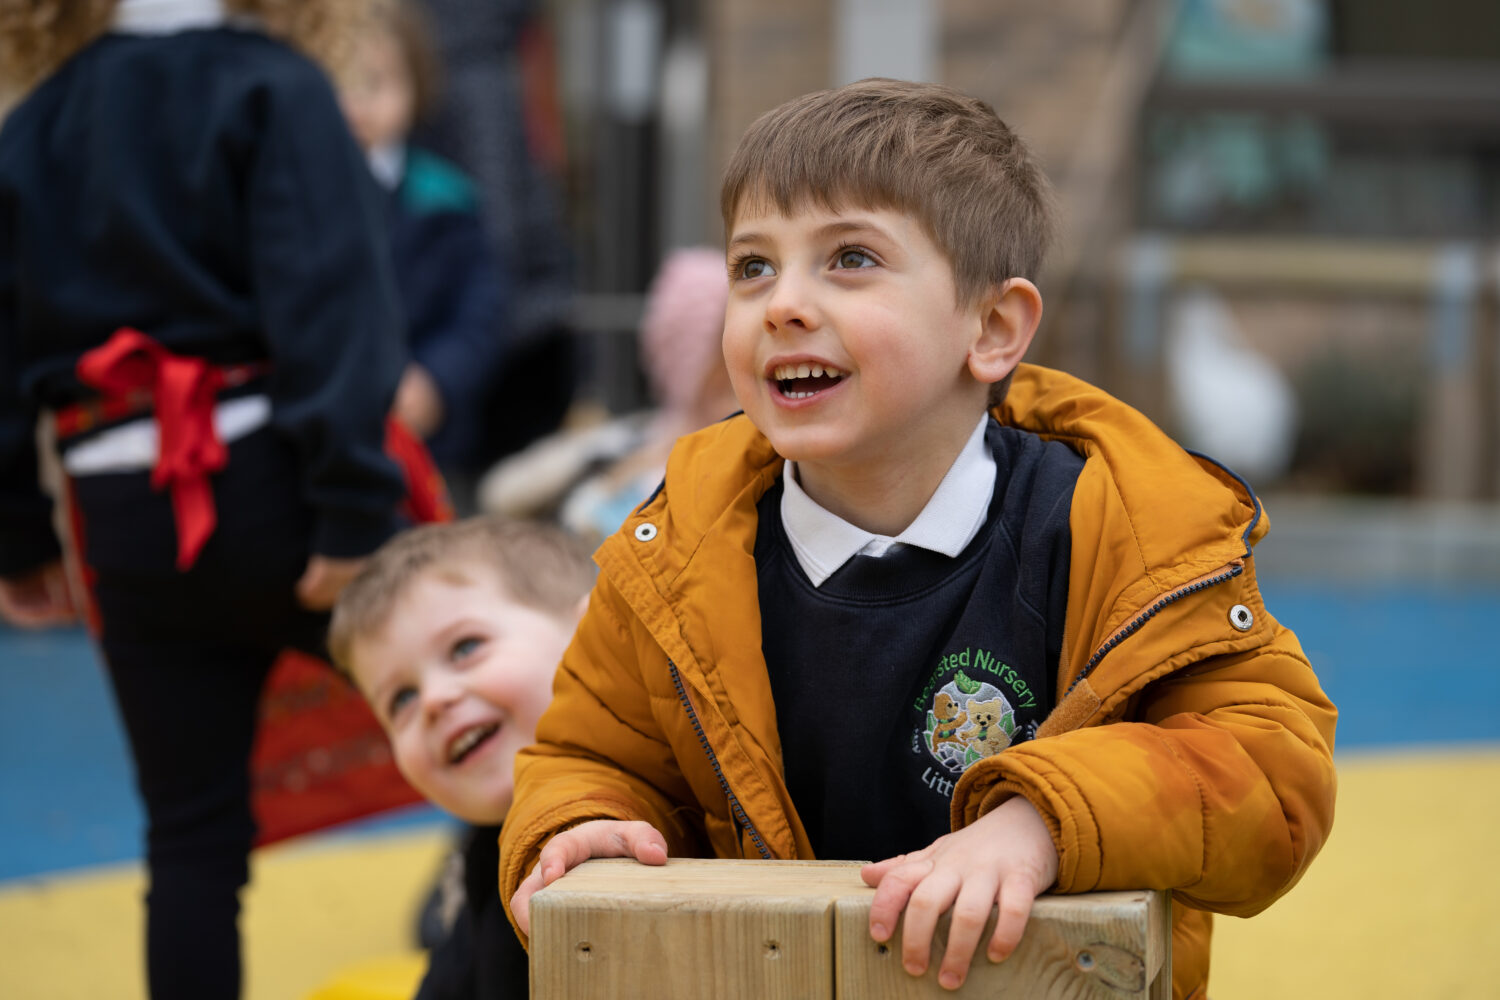 A young boy can be seen smiling brightly whilst wearing his winter coat in an outdoor area on the academy grounds.